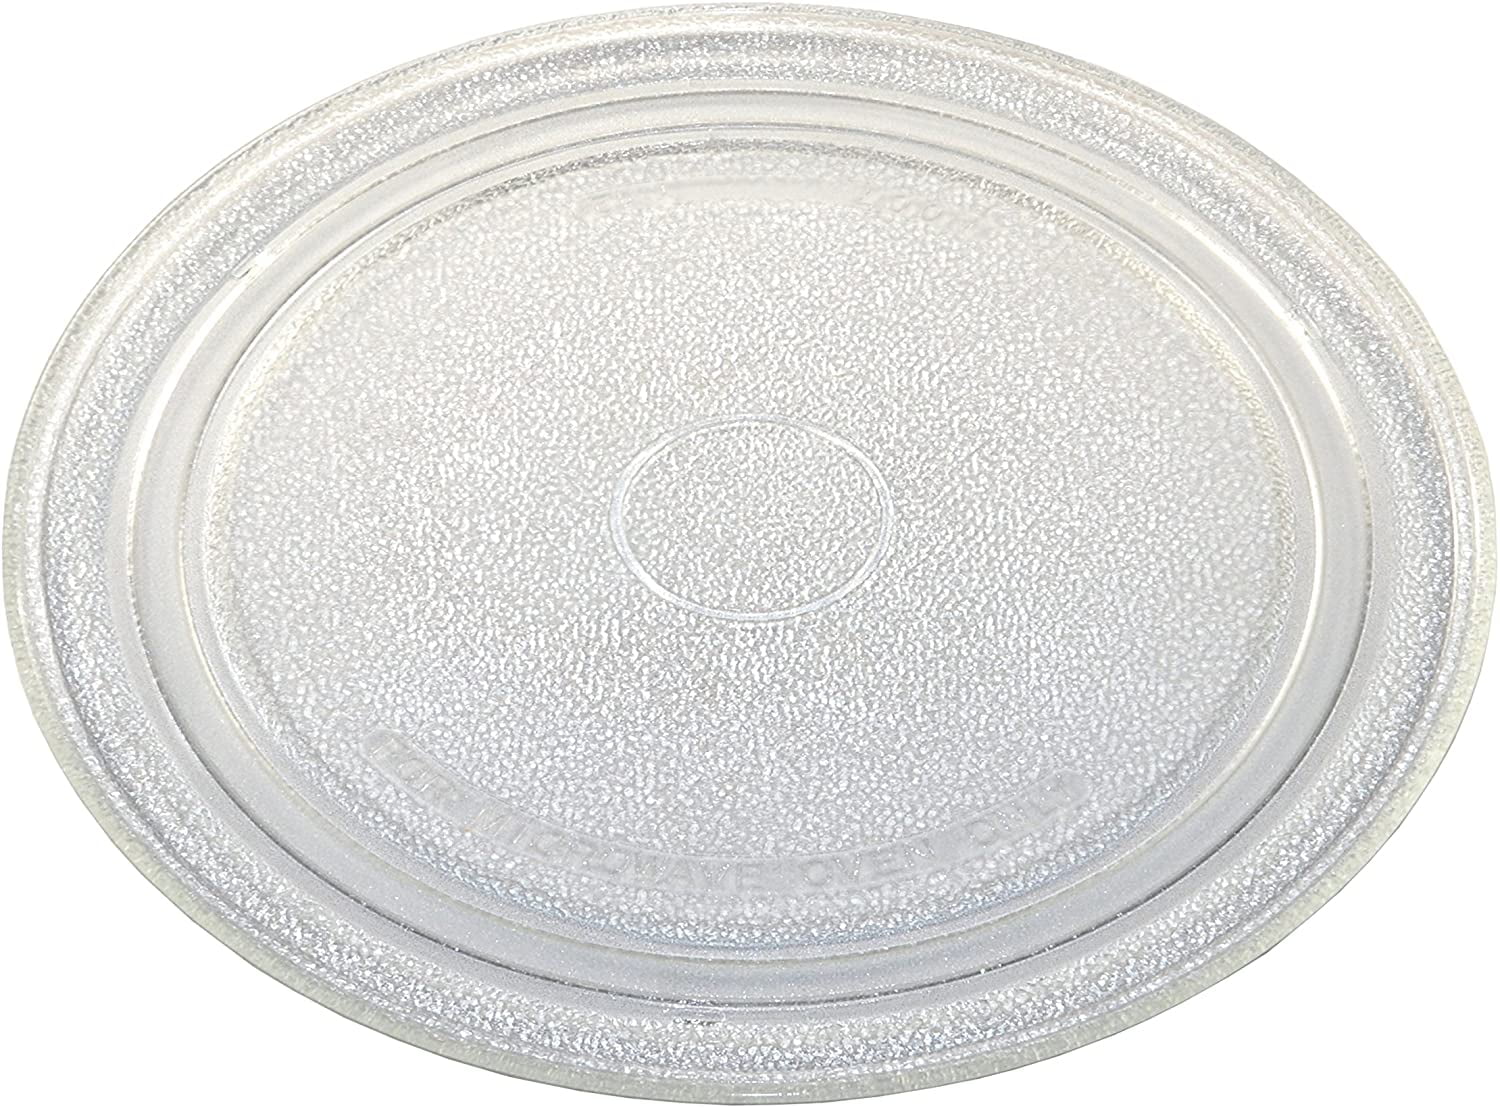 9 5/8" Microwave Glass Turntable Plate Tray for Sunbeam SM0701A7E SBM7700W 